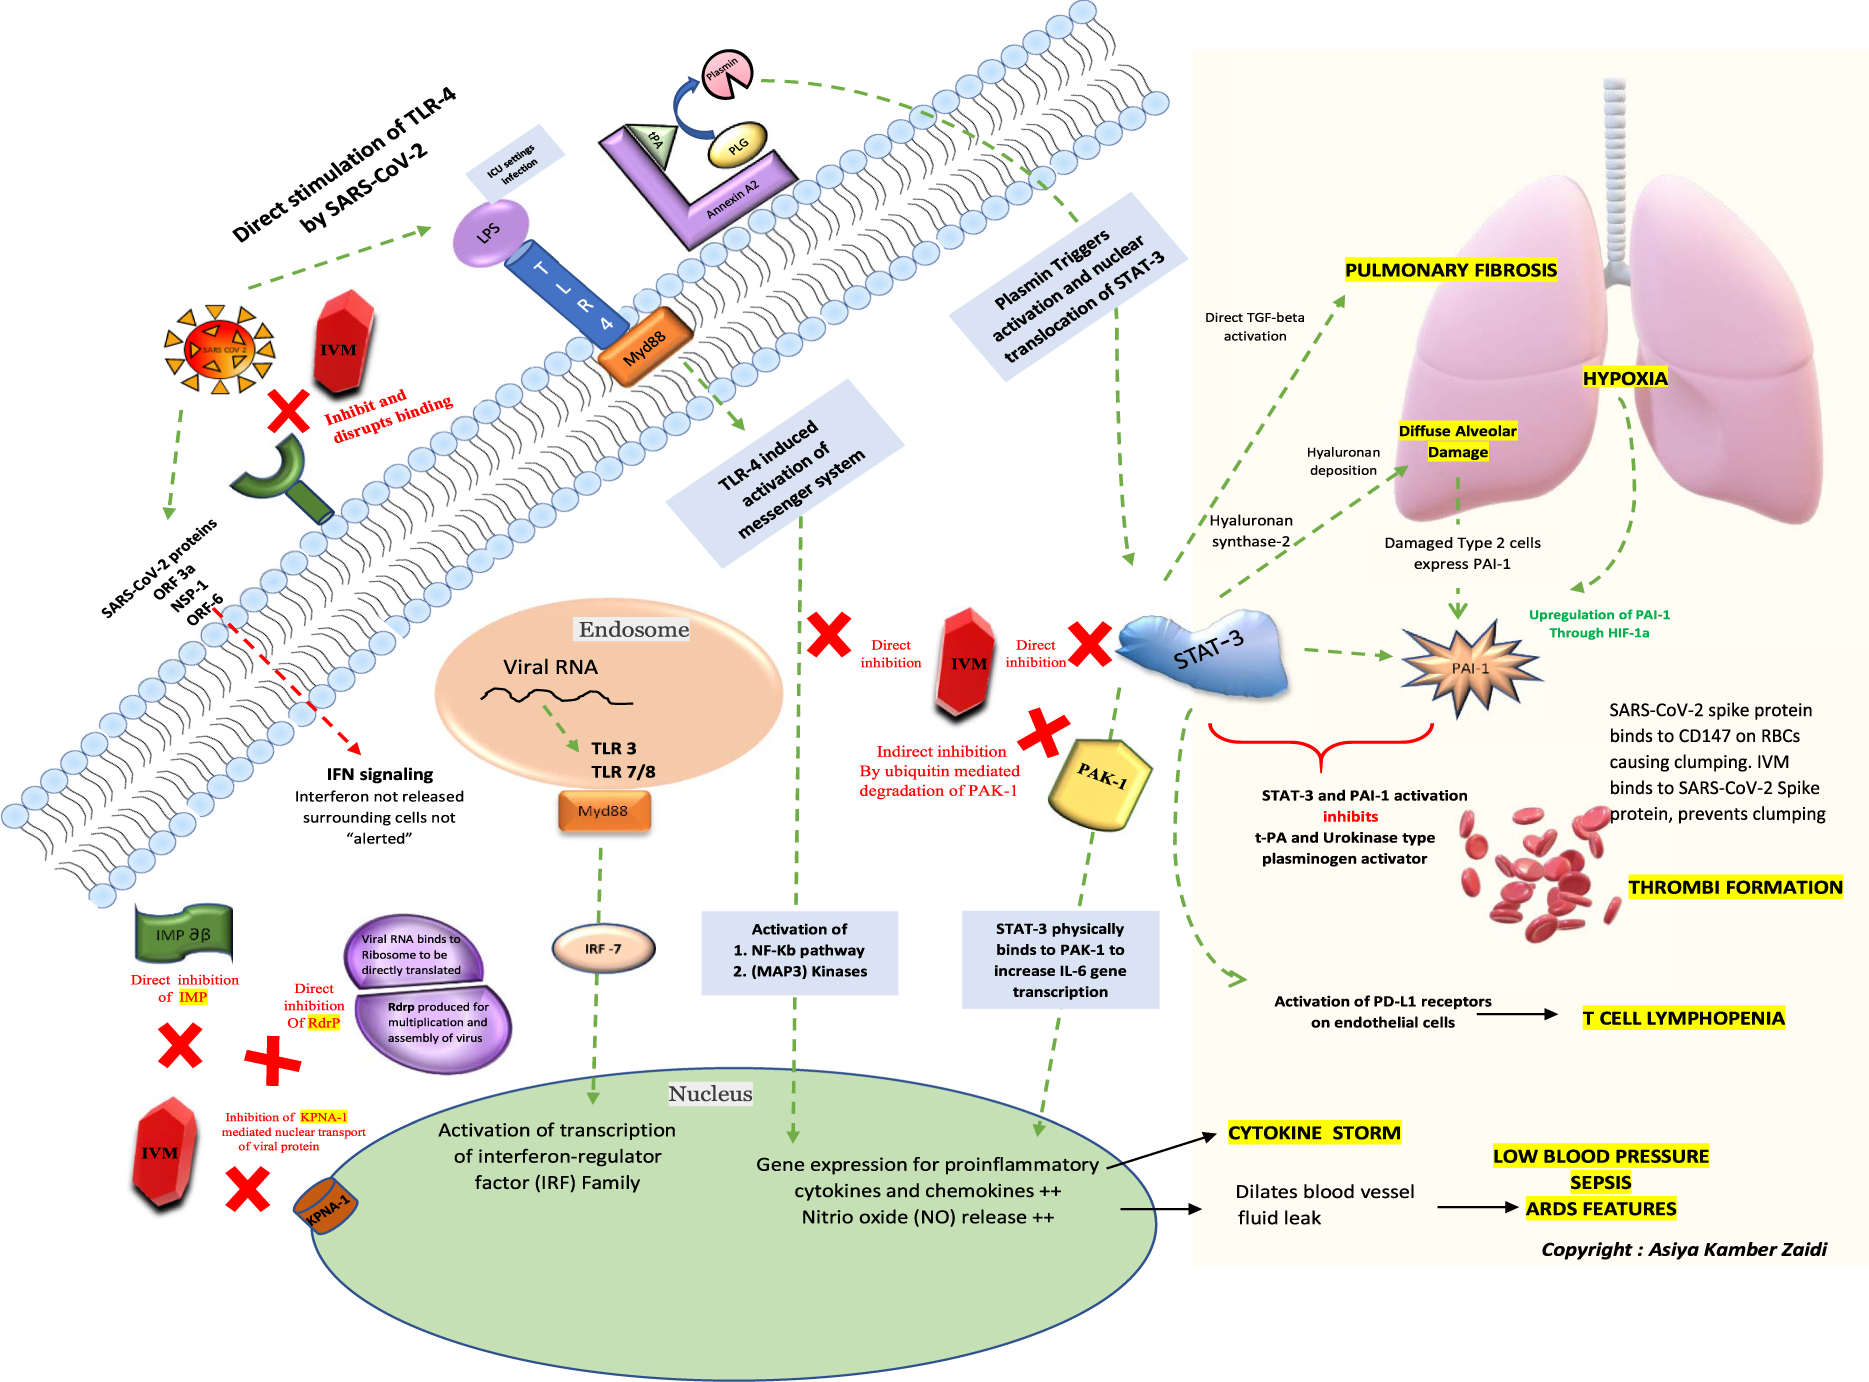 The mechanisms of action of ivermectin against SARS-CoV-2—an extensive  review